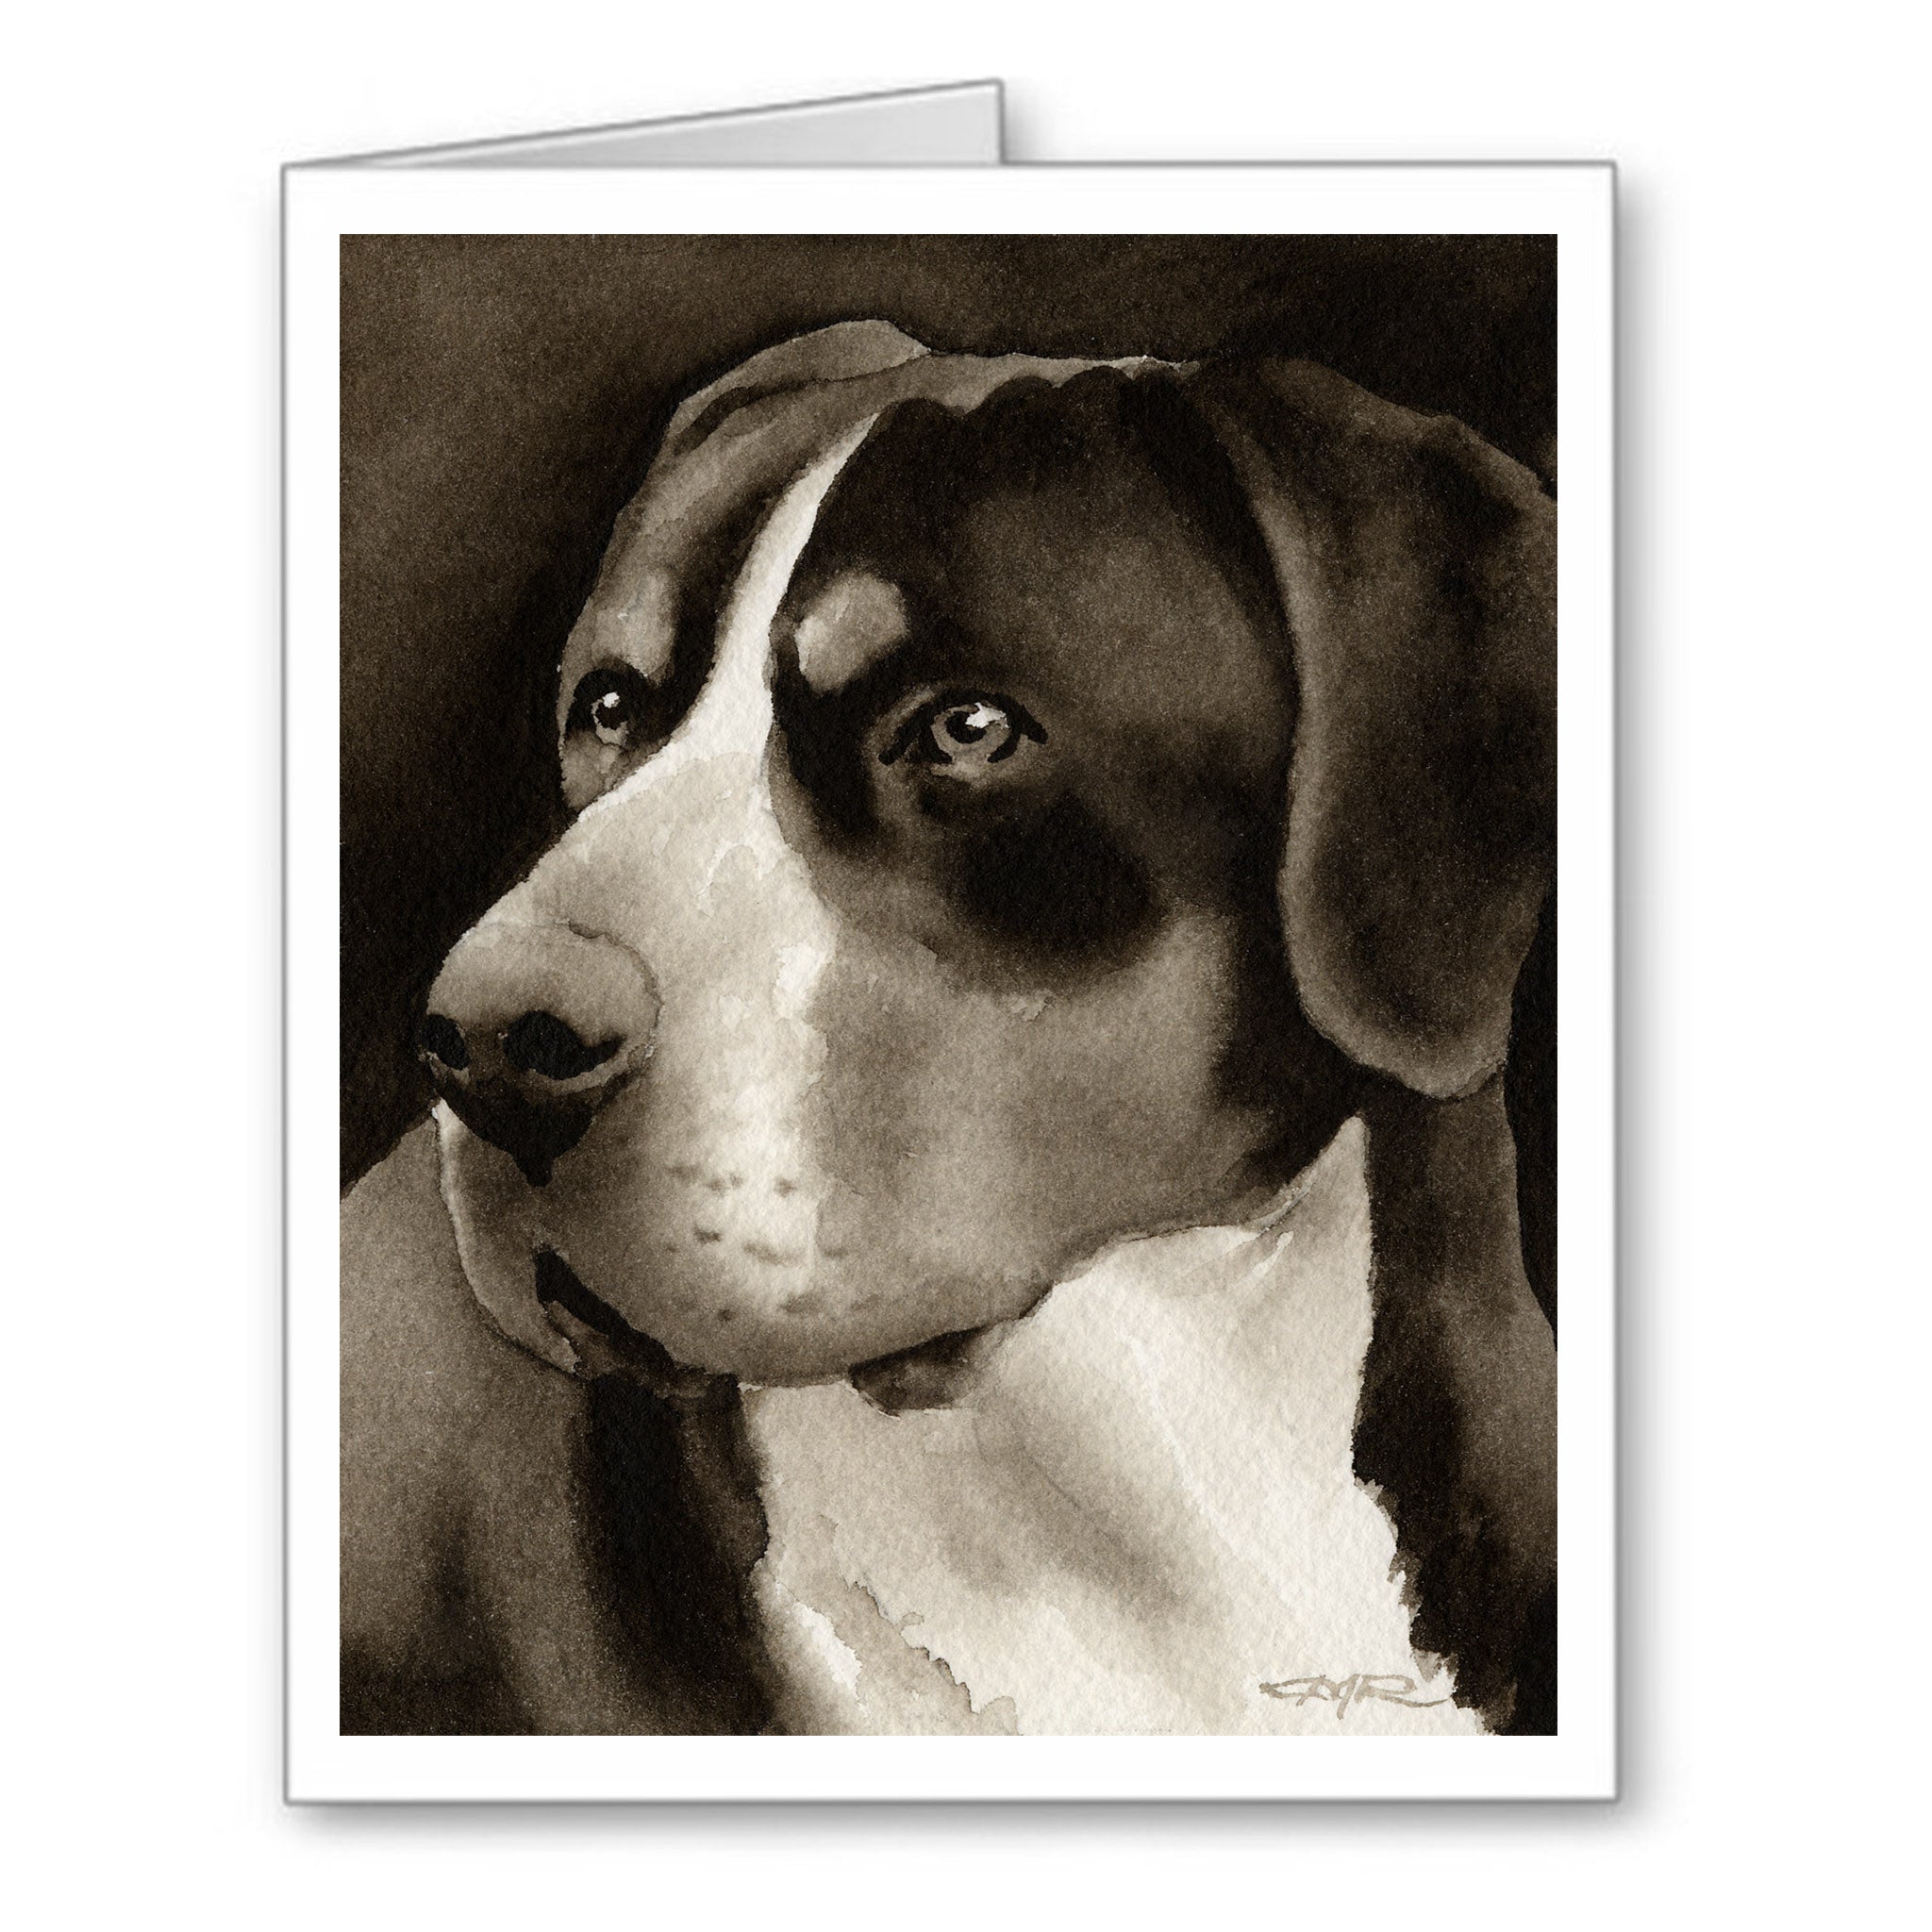 Greater Swiss Mountain Dog Watercolor Note Card Art by Artist DJ Rogers